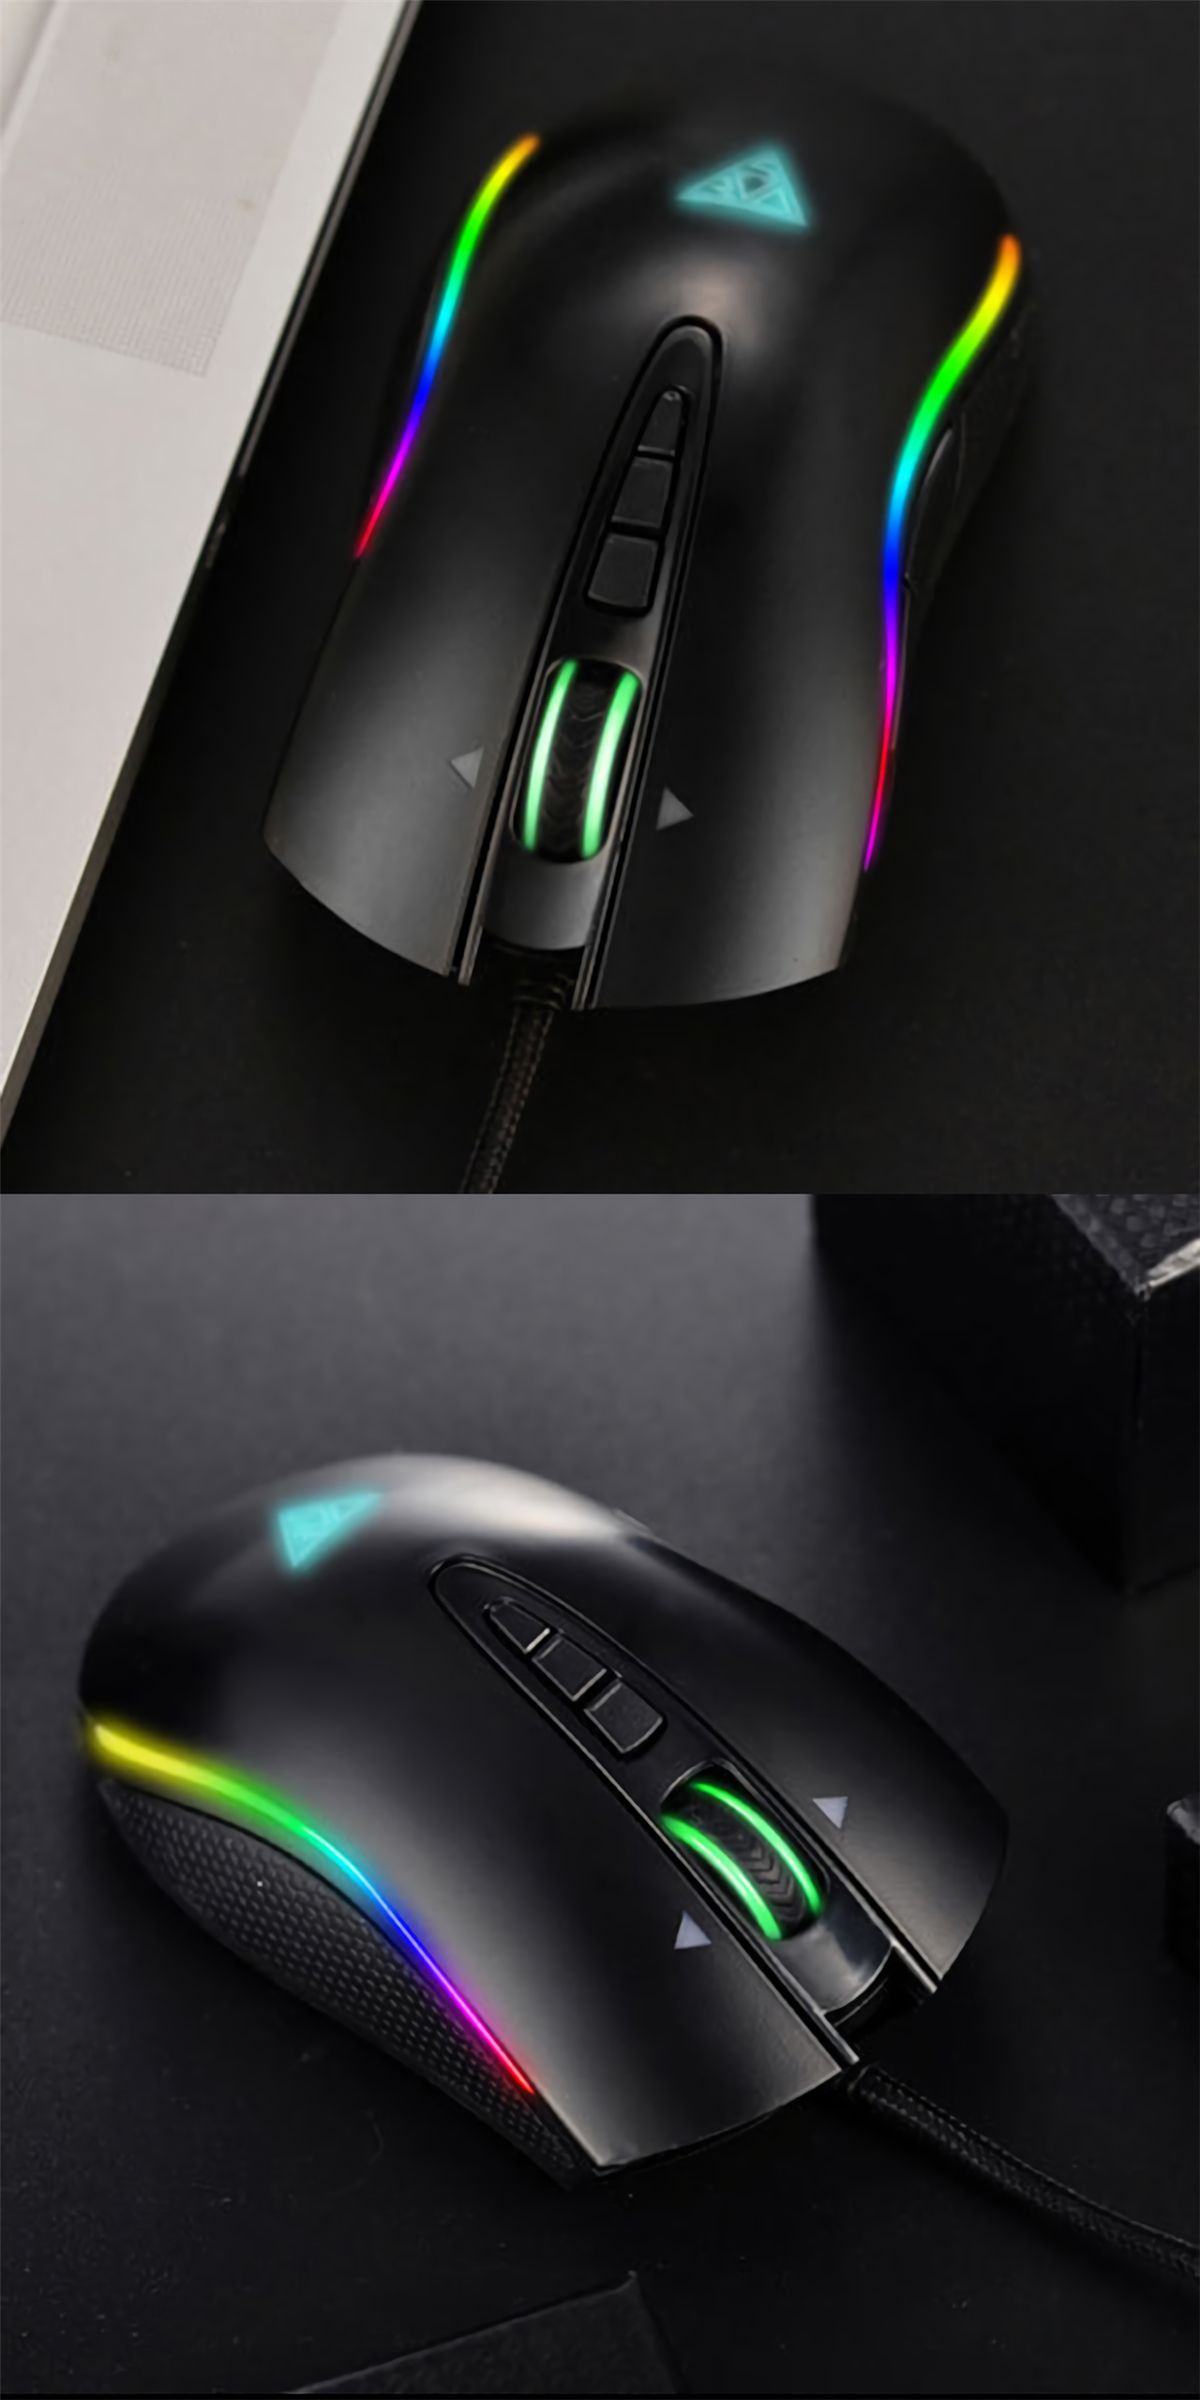 GAMEDIAS-M8-Mamba-Wired-RGB-Light-Gaming-Mouse-4000DPI-RGB-Backlit-7-Buttons-Mouse-1662774